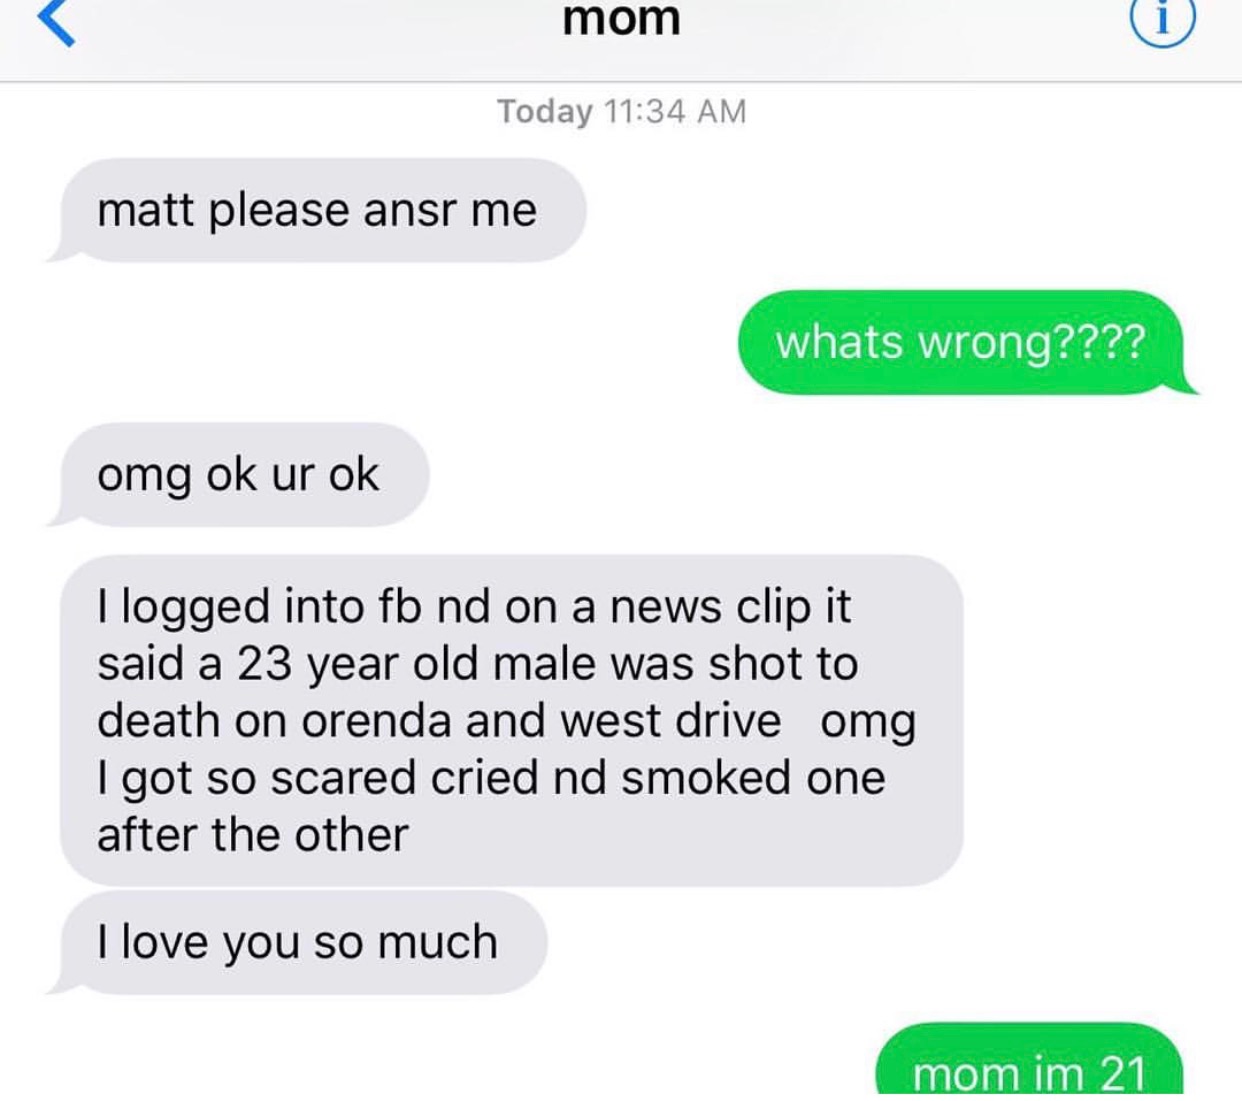 communication - mom Today matt please ansr me whats wrong???? omg ok ur ok I logged into fb nd on a news clip it said a 23 year old male was shot to death on orenda and west drive omg I got so scared cried nd smoked one after the other I love you so much 